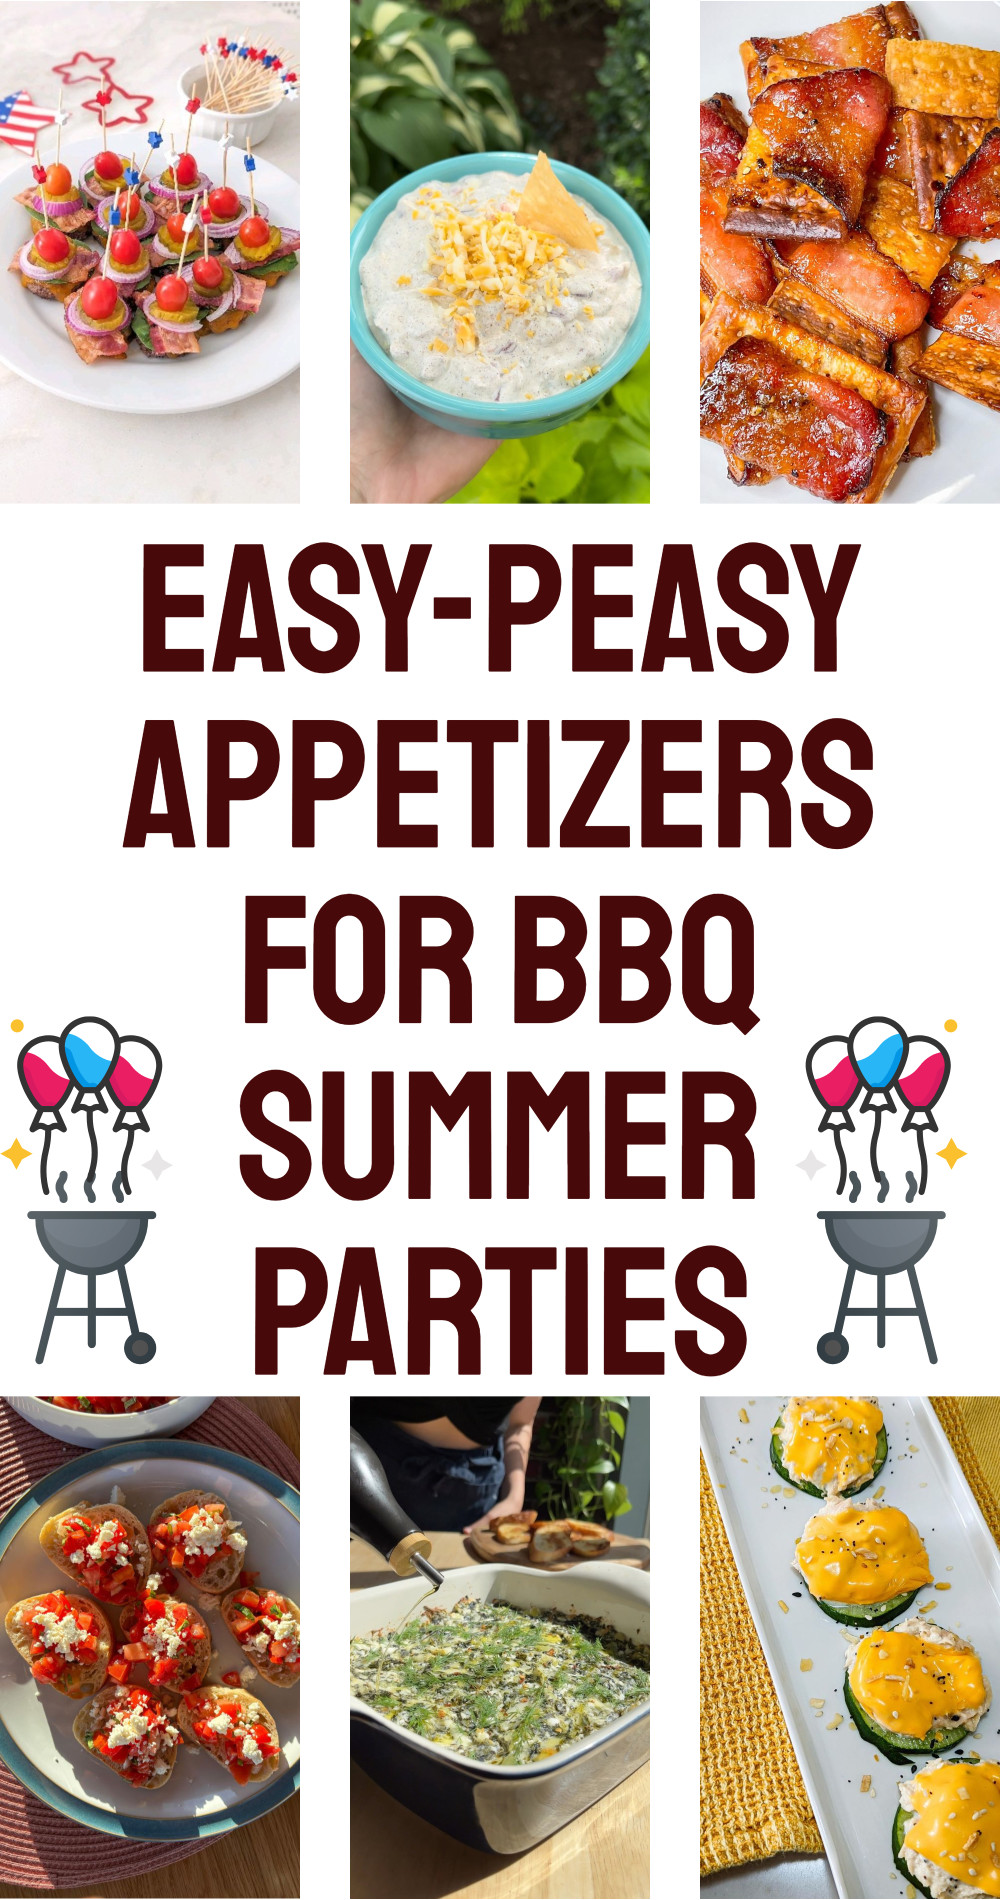 Easy Appetizers for BBQ Summer Parties